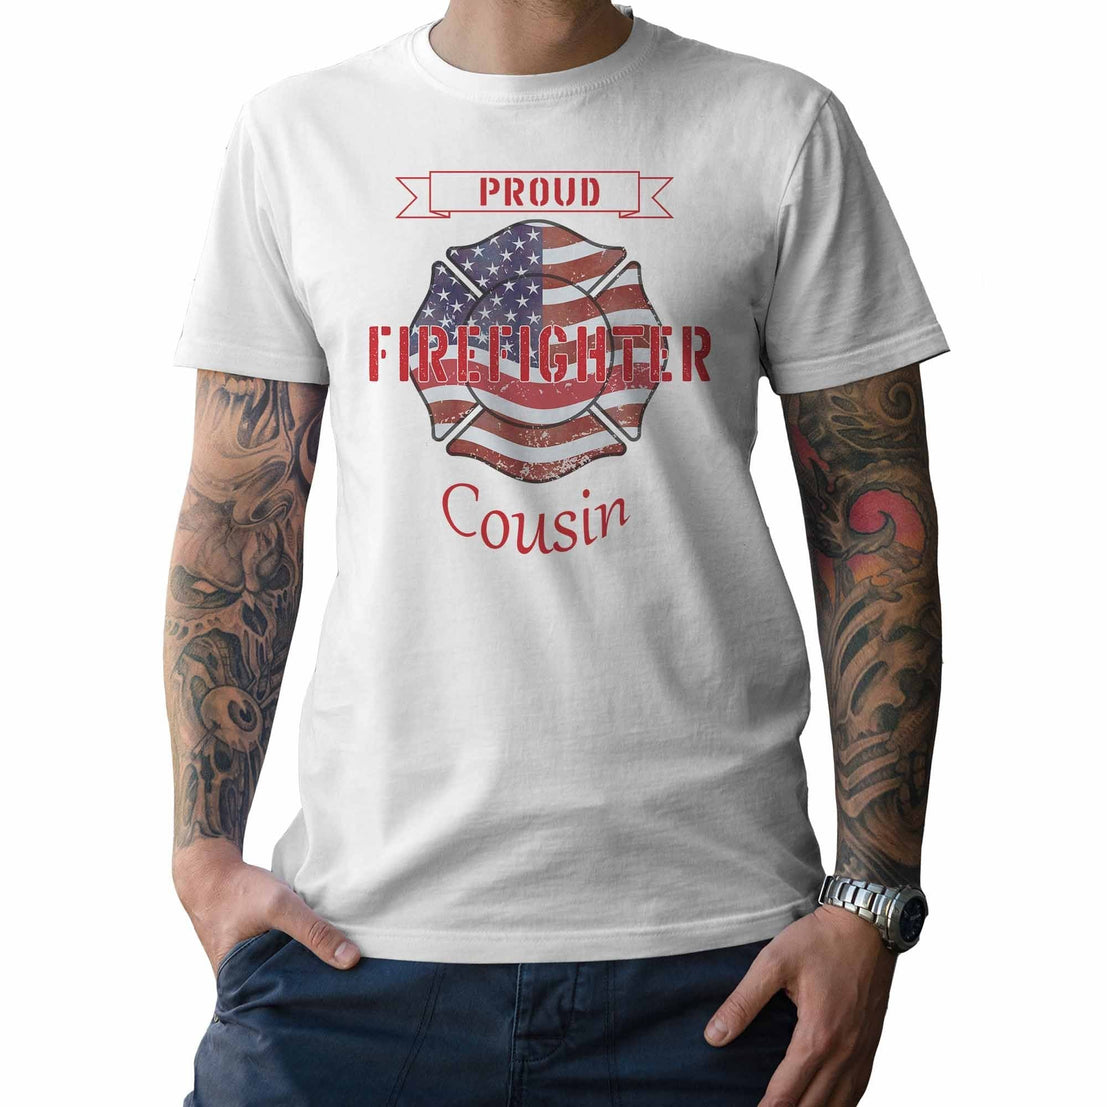 Proud Firefighter Cousin - My Custom Tee Party